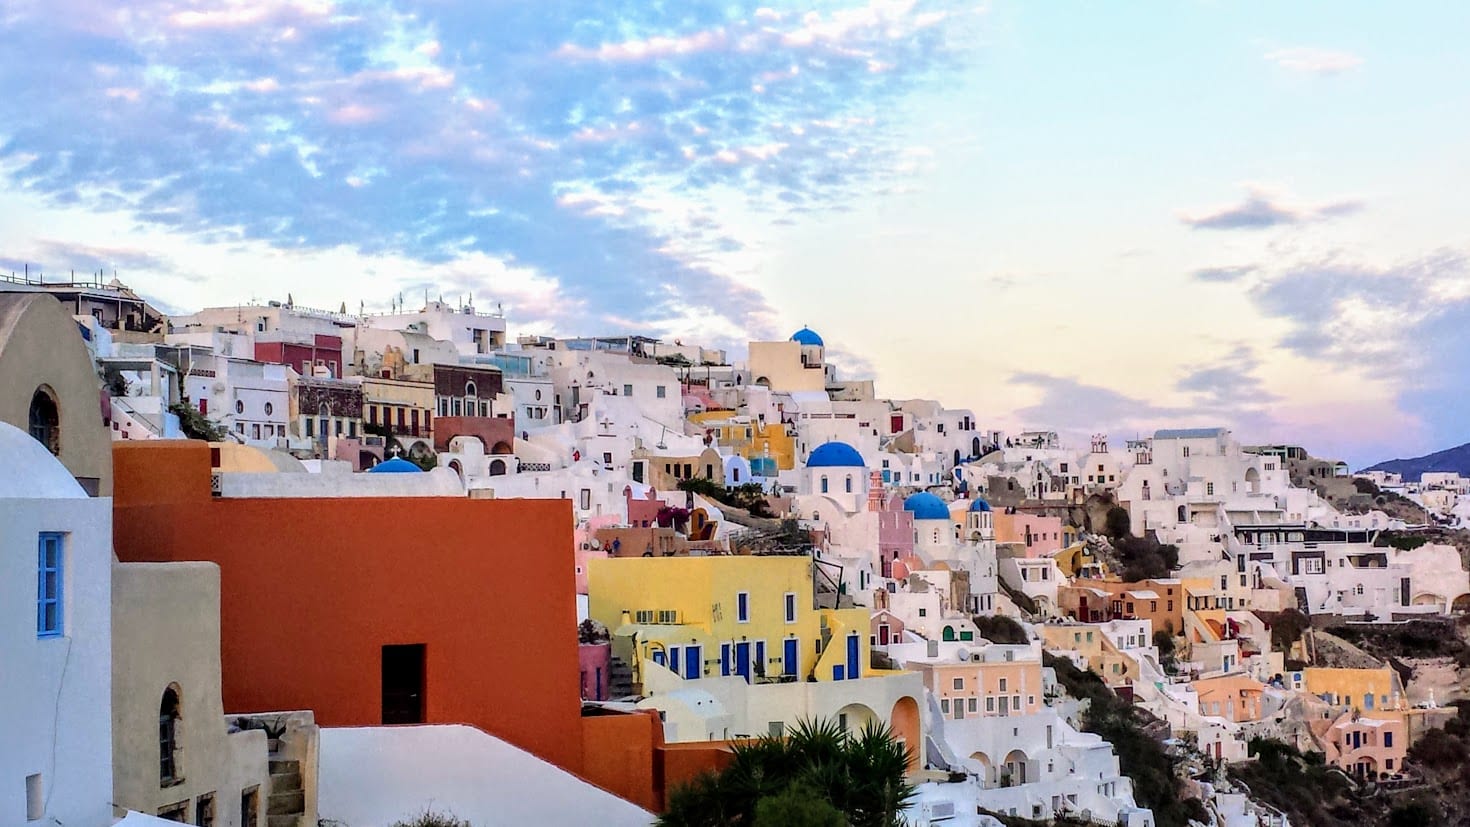 One day in Santorini - things to do